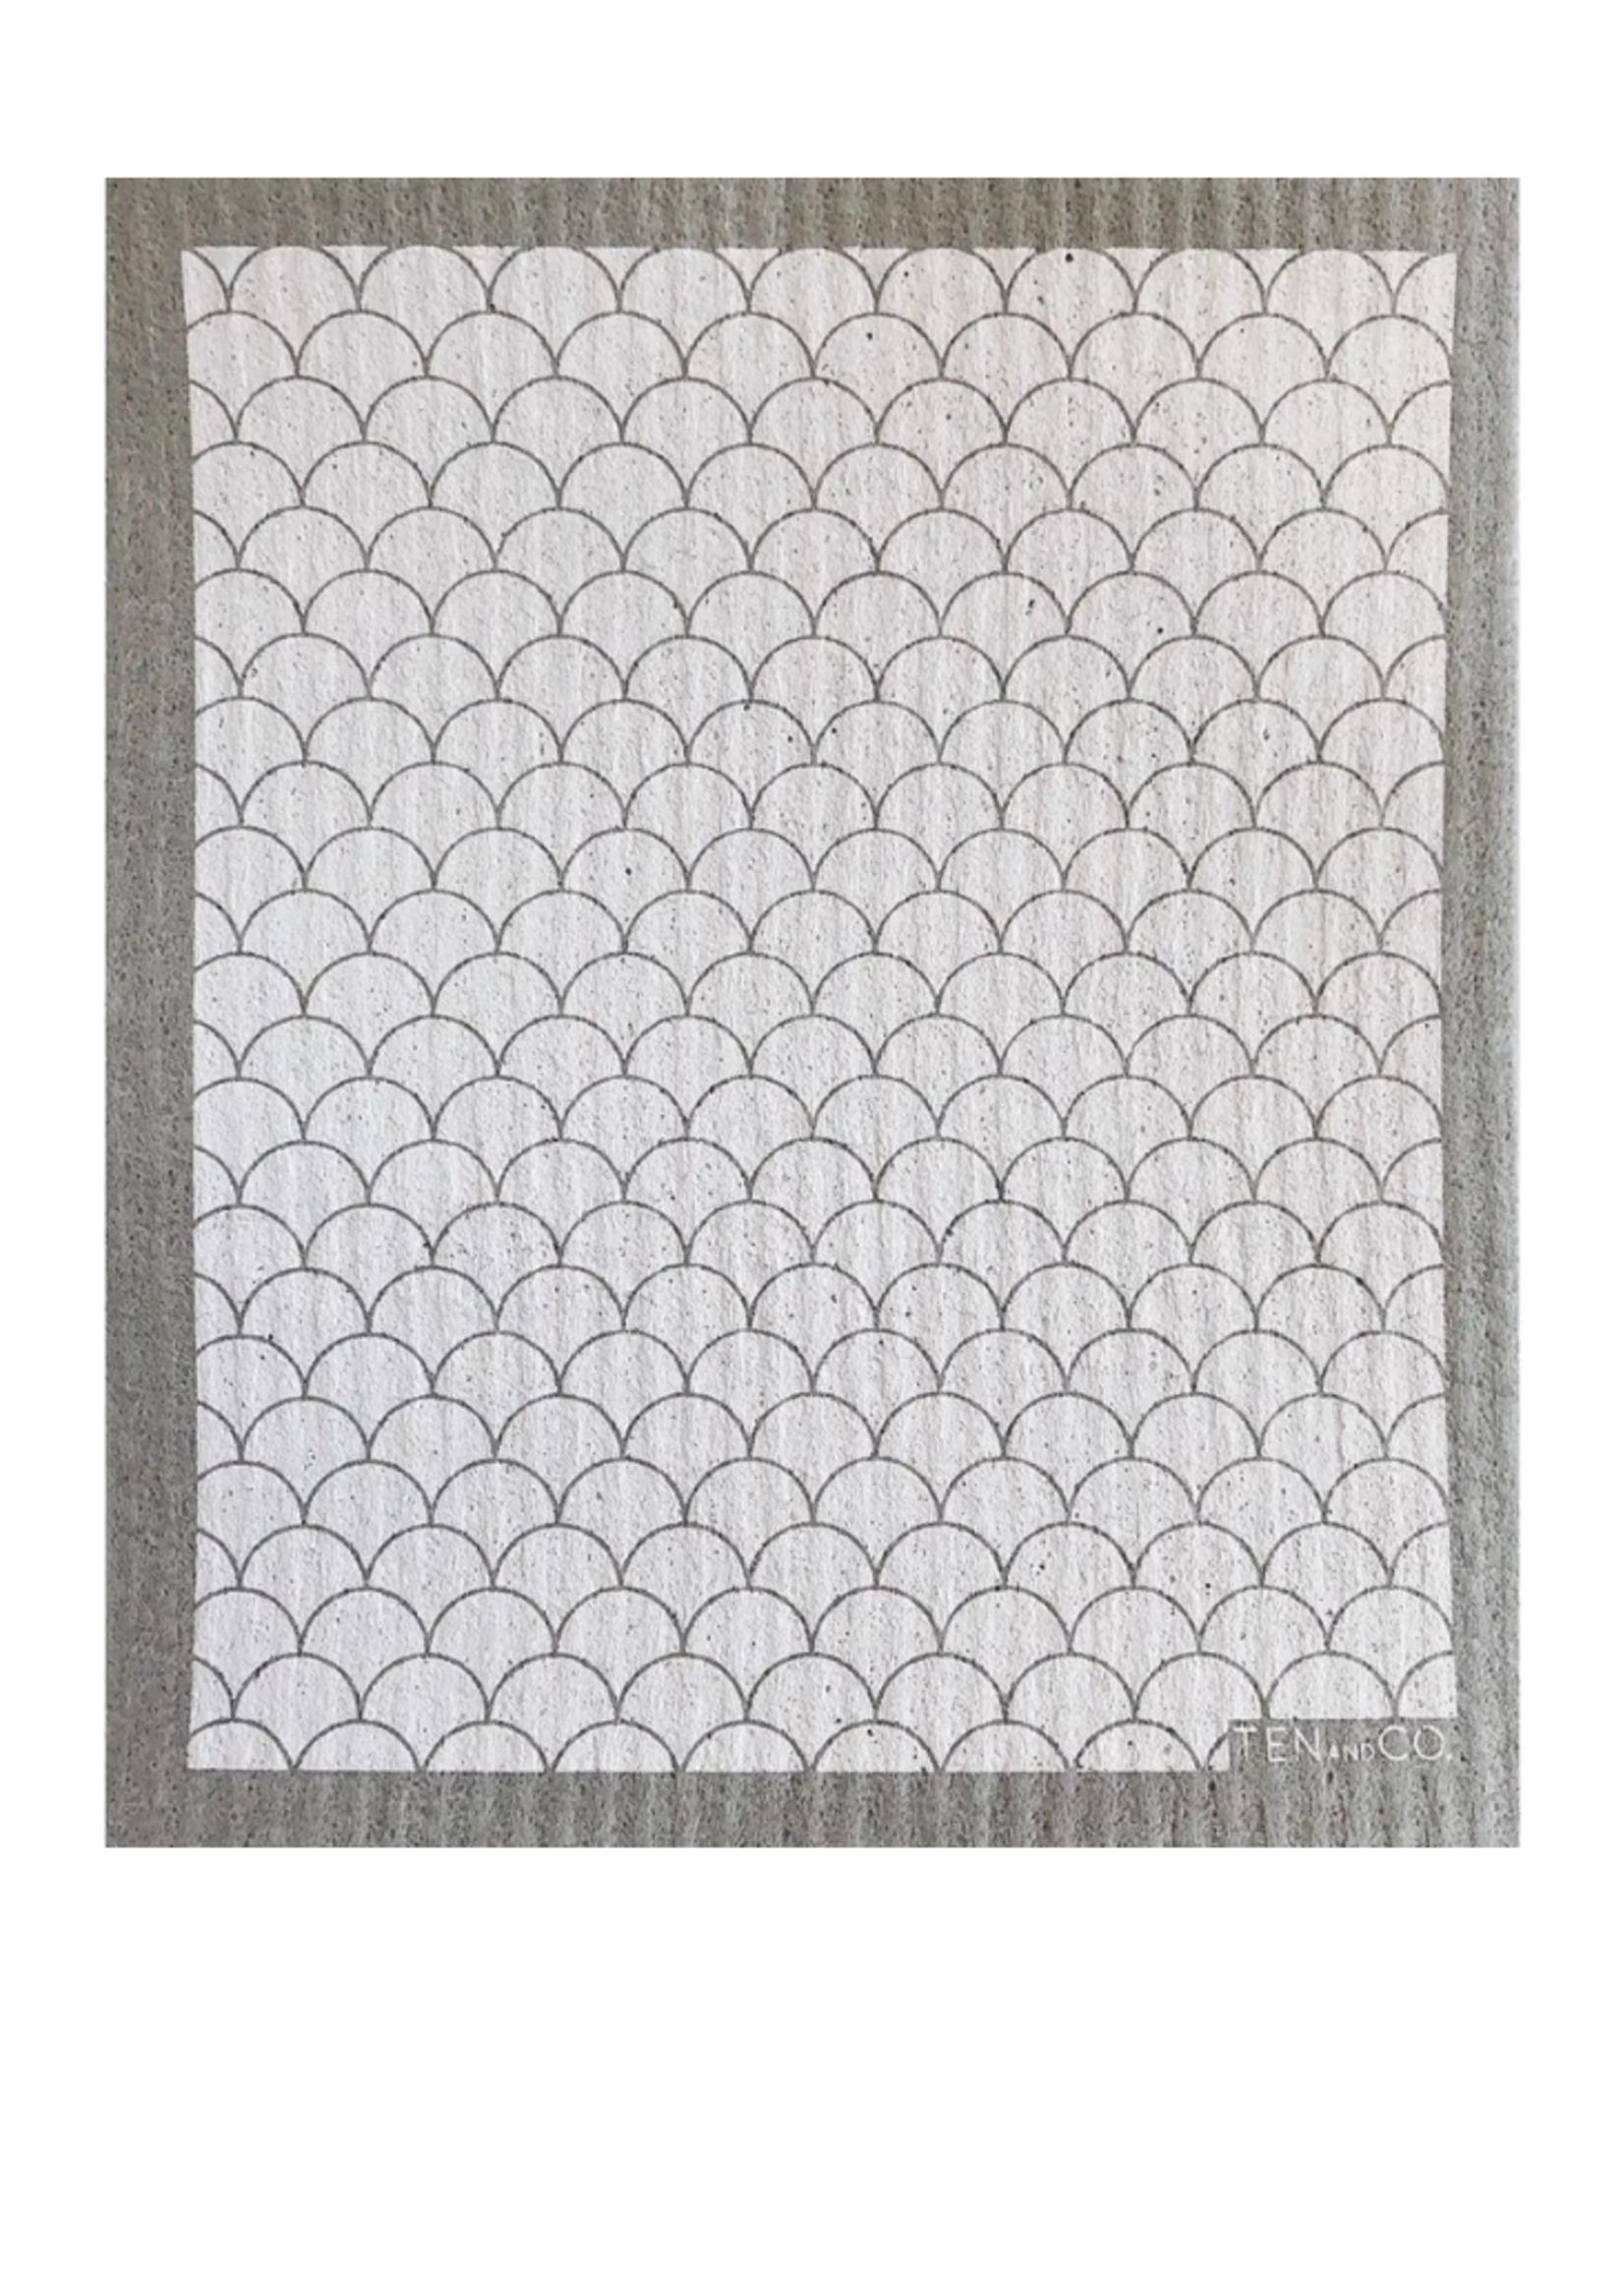 Ten and Co. Ten and Co. Scallop White/Grey Sponge Cloth